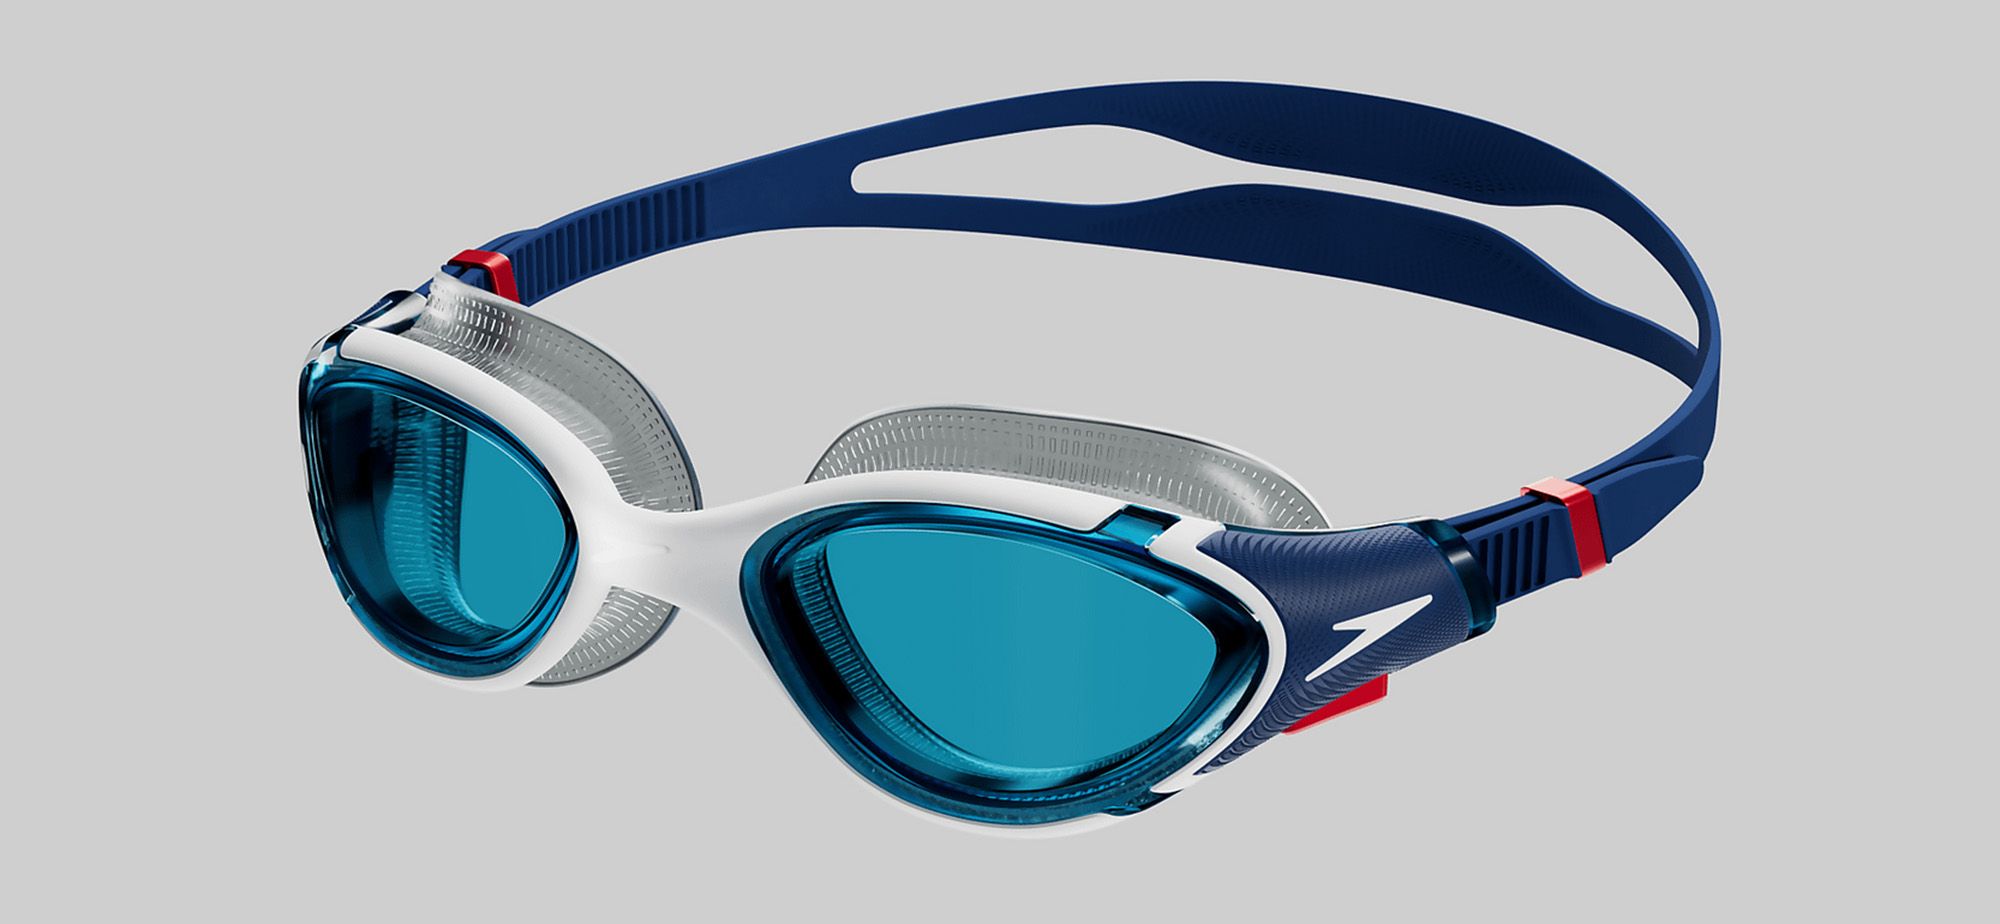 Designing the Mechanism for Speedo Biofuse 2.0 Goggles